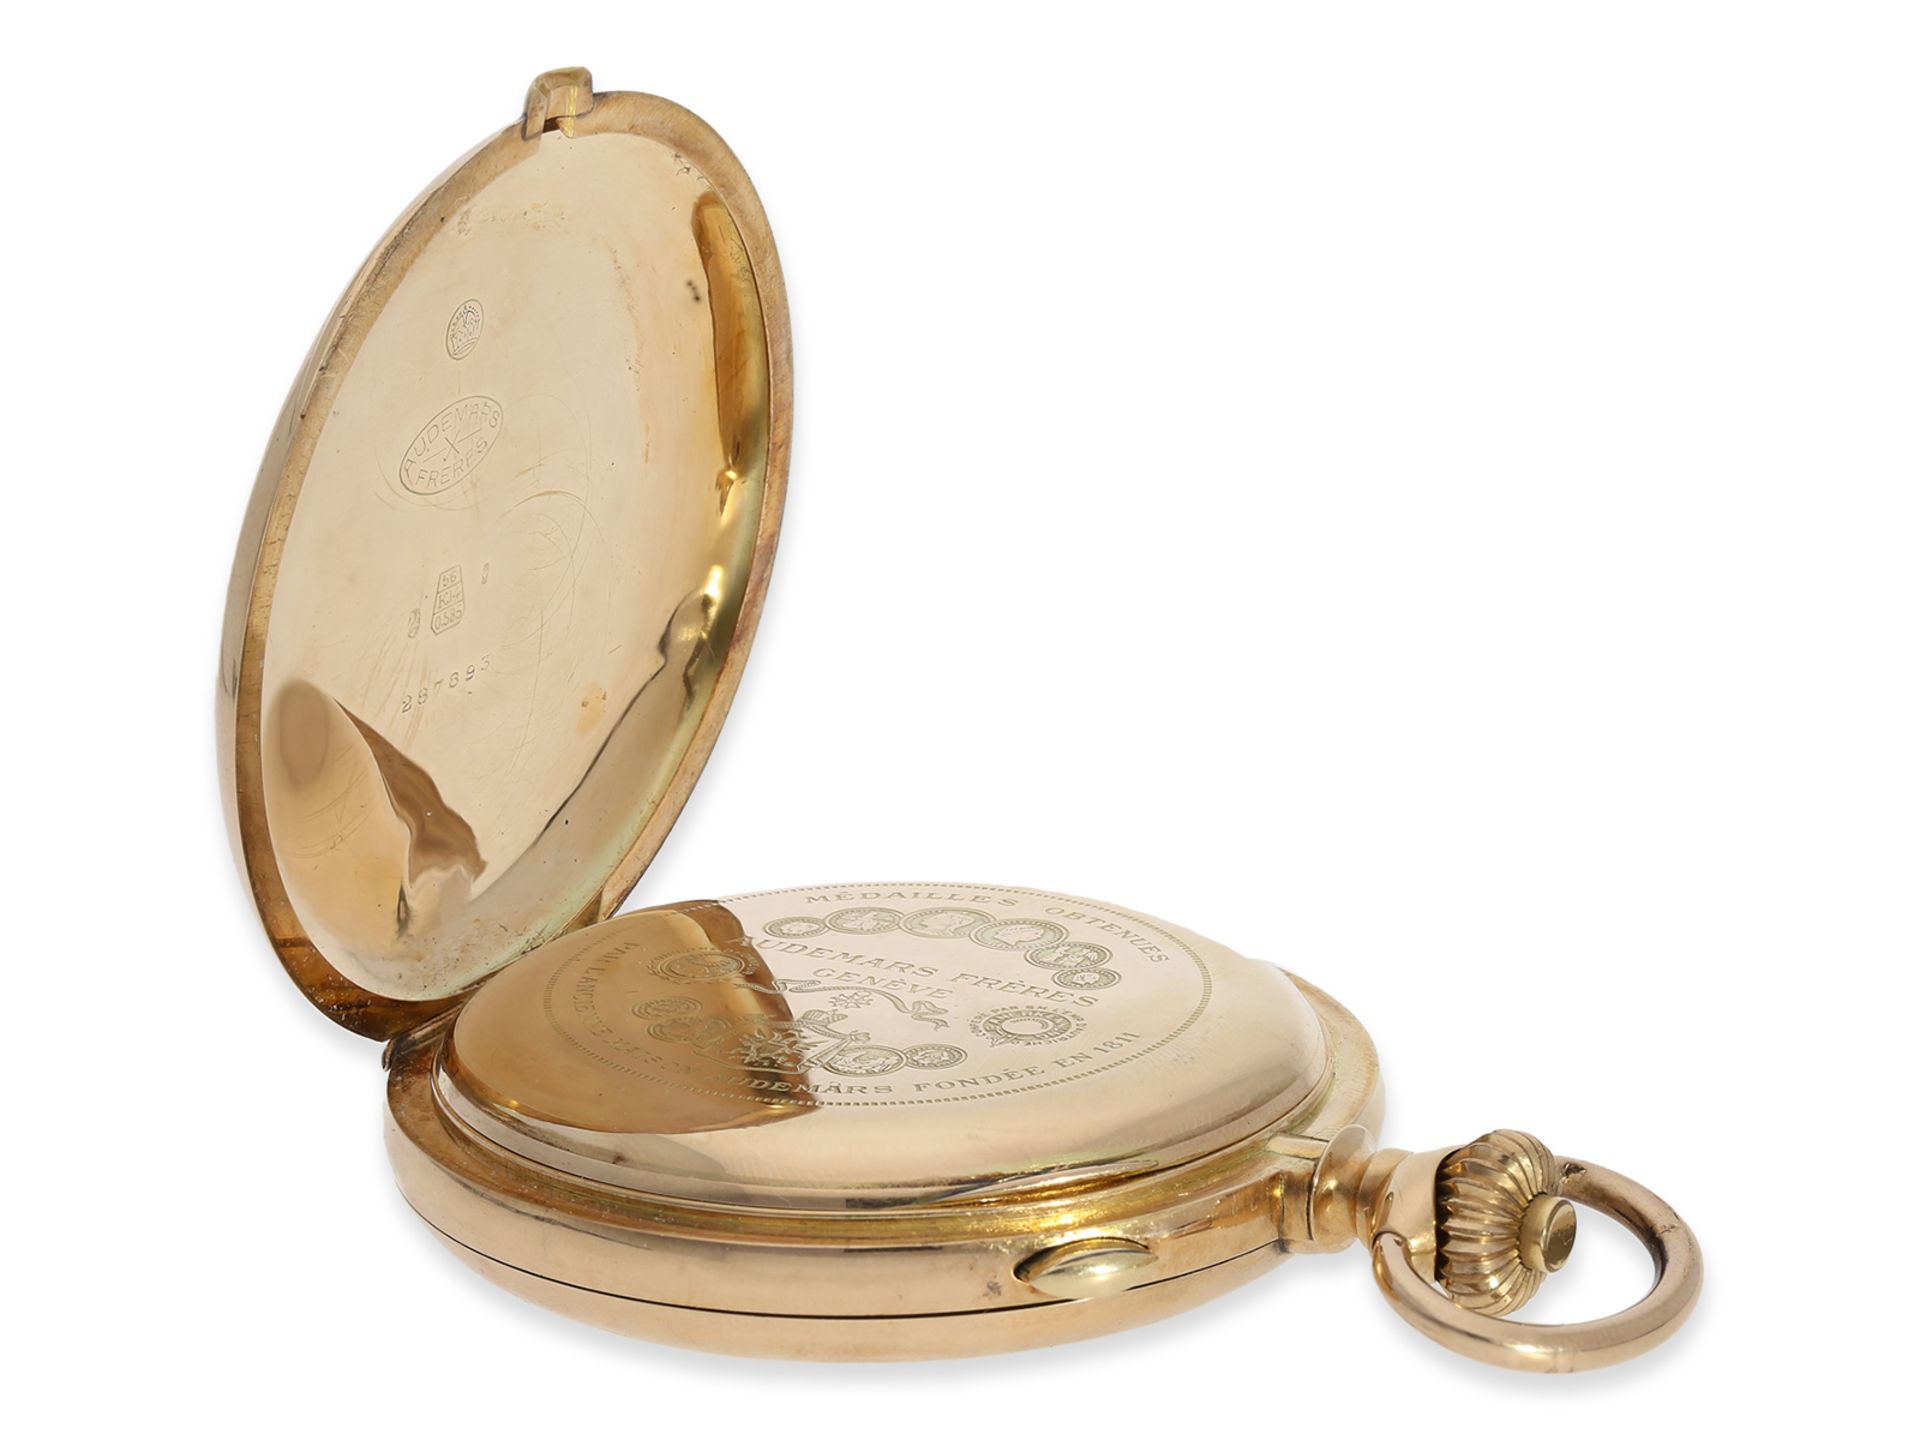 Pocket watch: impressive gold hunting case watch with repeater and chronograph, Audemars Freres Gene - Image 5 of 8